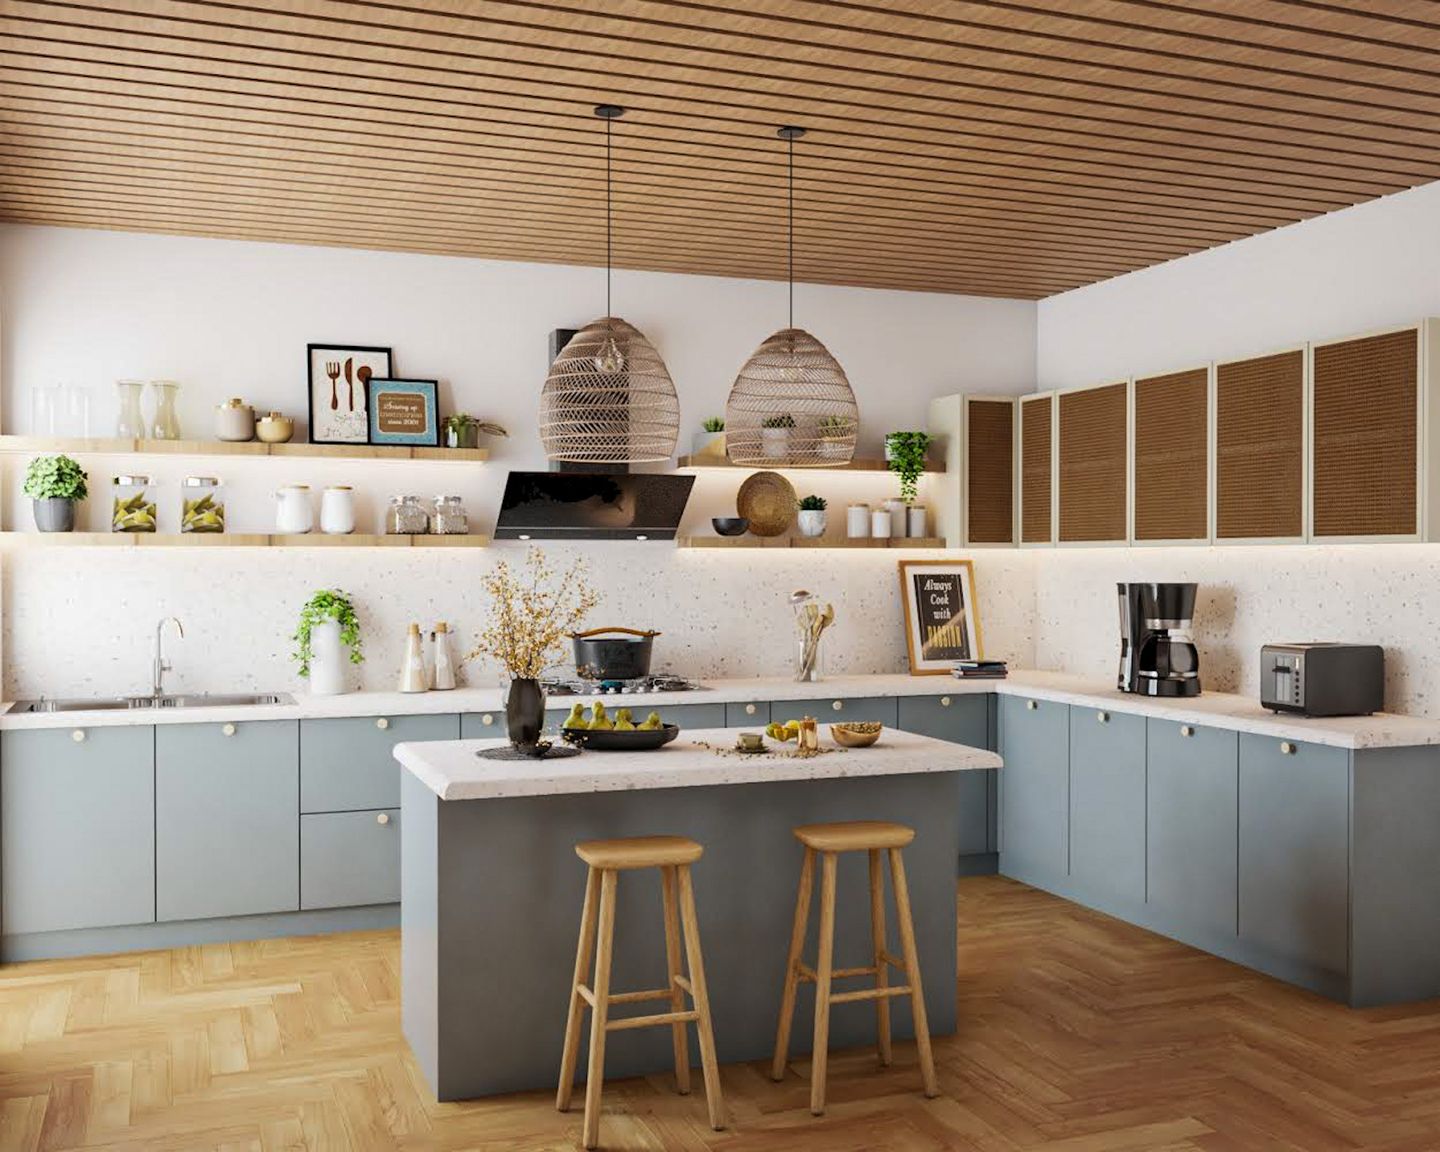 Kitchen Design With Blue And Brown Storage Units - Livspace